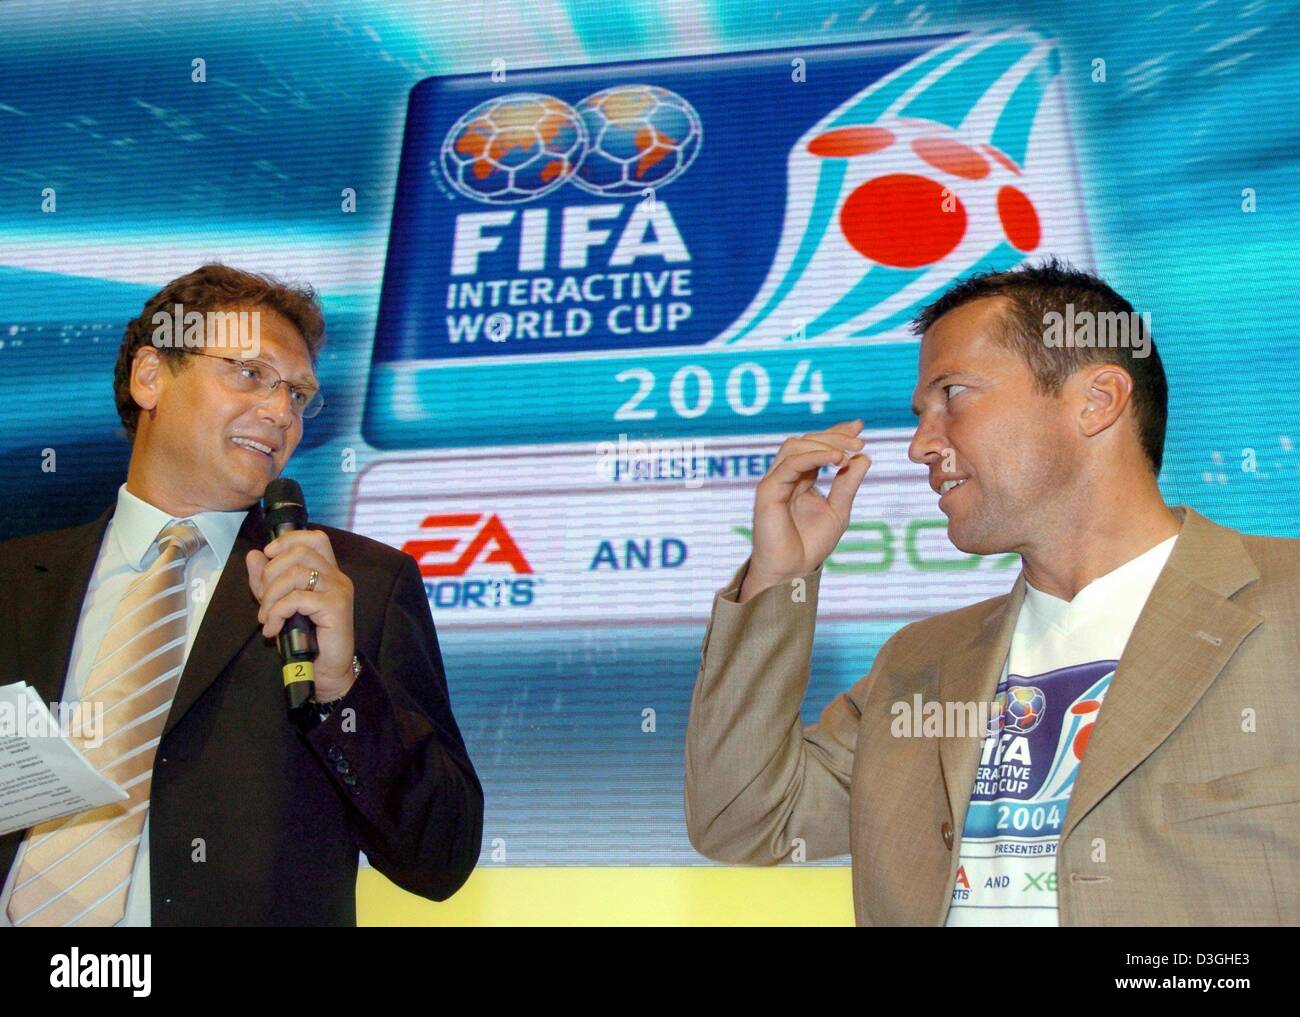 (dpa) - Lothar Matthaeus (R), former soccer player in the German national soccer squad and current coach of the Hungarian national soccer team, stands next to Jerome Valcke, Head of marketing of FIFA, at the GC-Games Convention fair in Leipzig, Germany, Thursday, 19 August 2004. FIFA is taking up the patronage for the first interactive soccer world championship. Fans throughout the Stock Photo